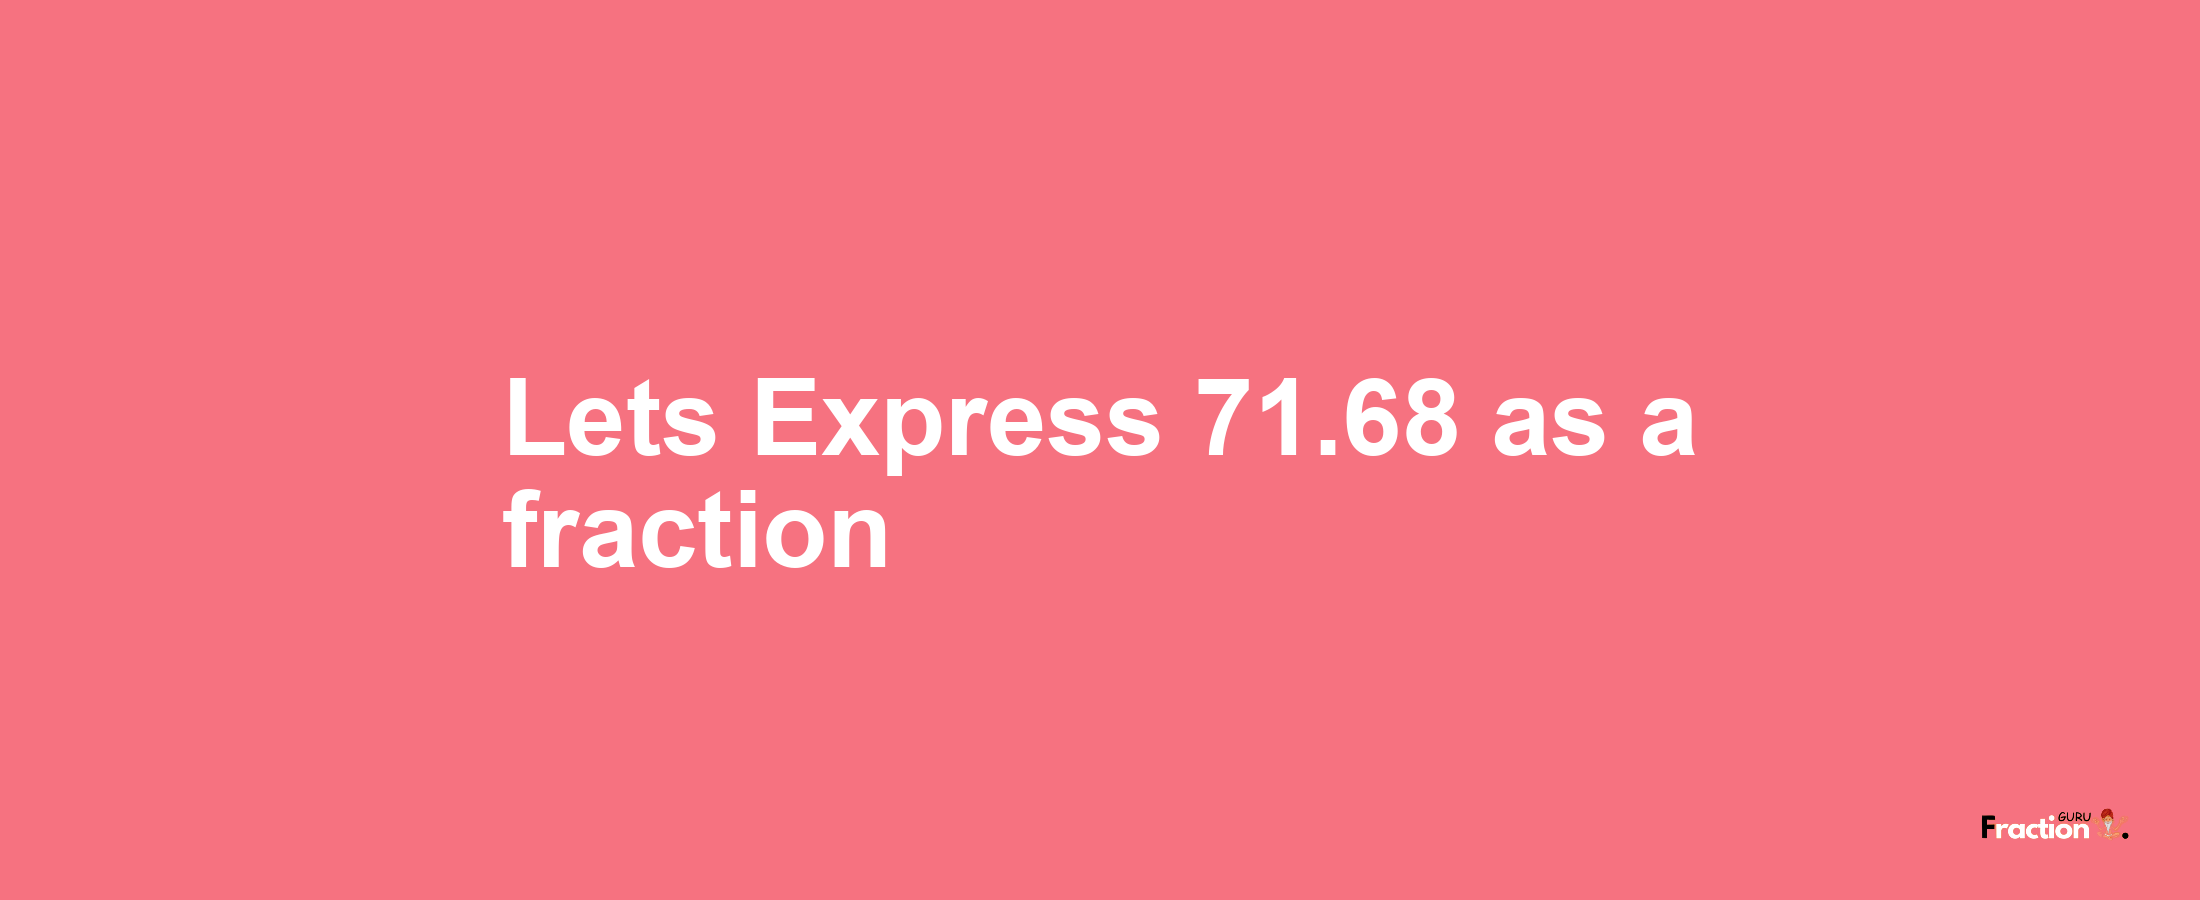 Lets Express 71.68 as afraction